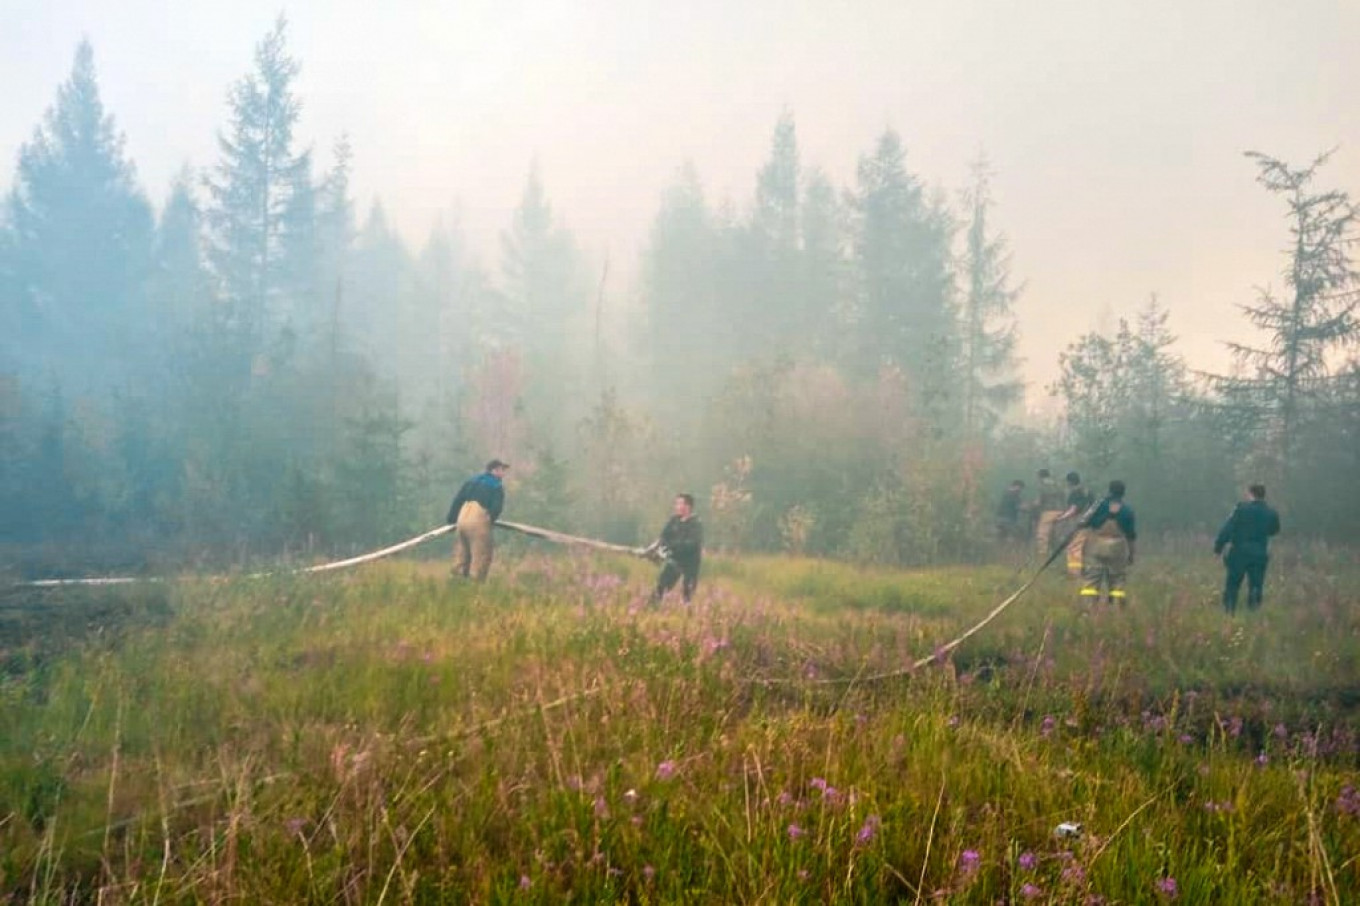 Nearly 300 Wildfires in Siberia Amid Record Warm Weather